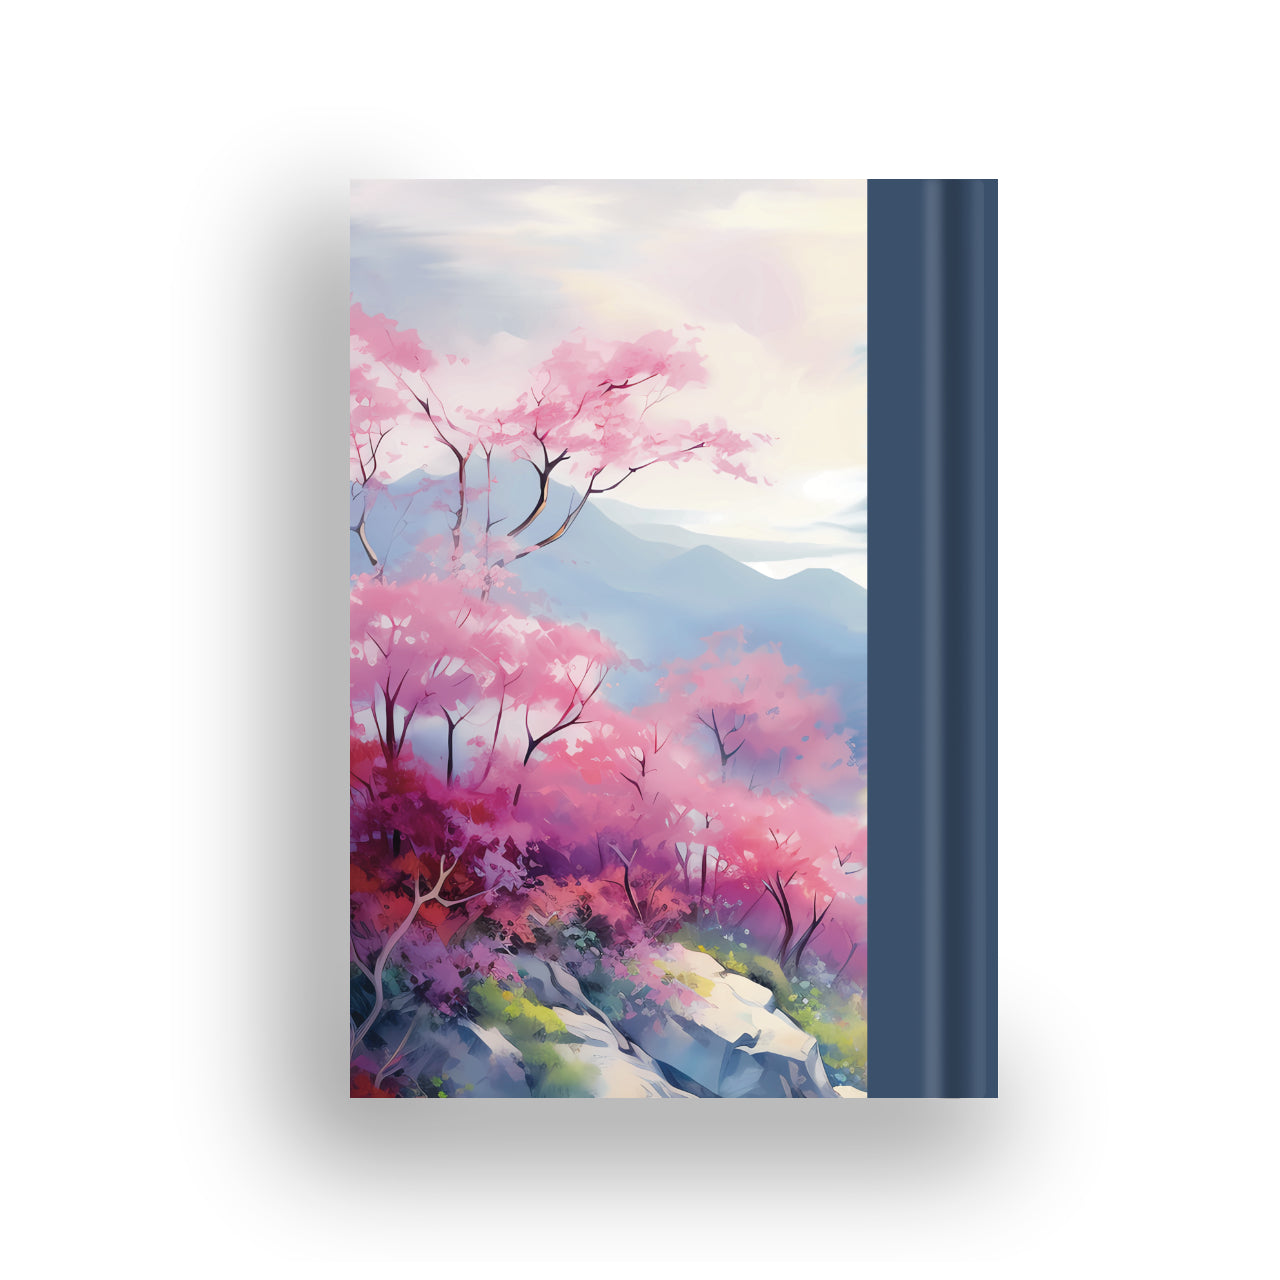 Zen notebook back cover with tranquil mountain view design with pink foilage